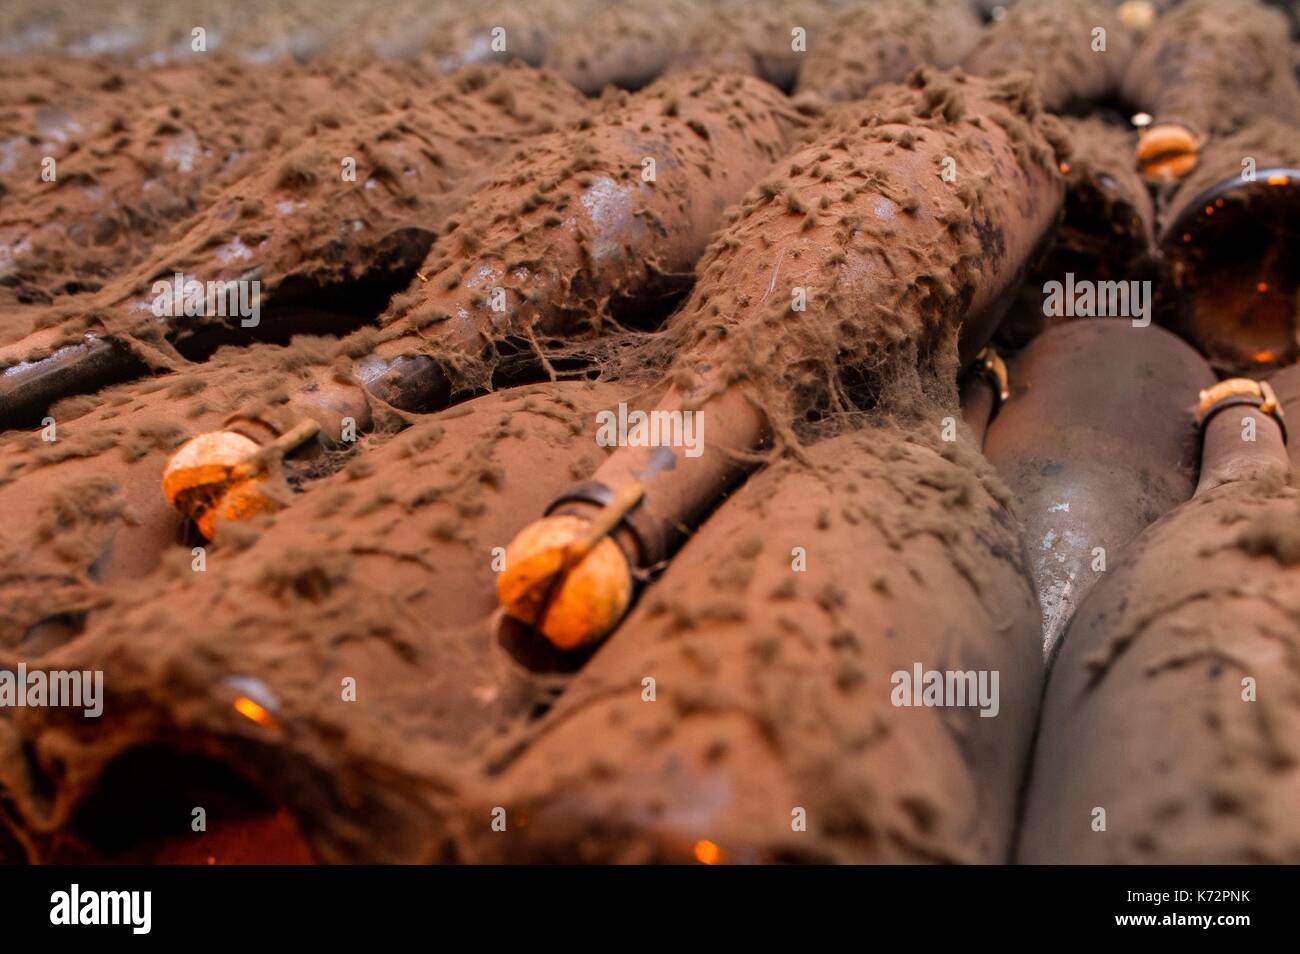 France, Marne, Ay, dusty old bottles and cave of Bollinger champagne Stock Photo